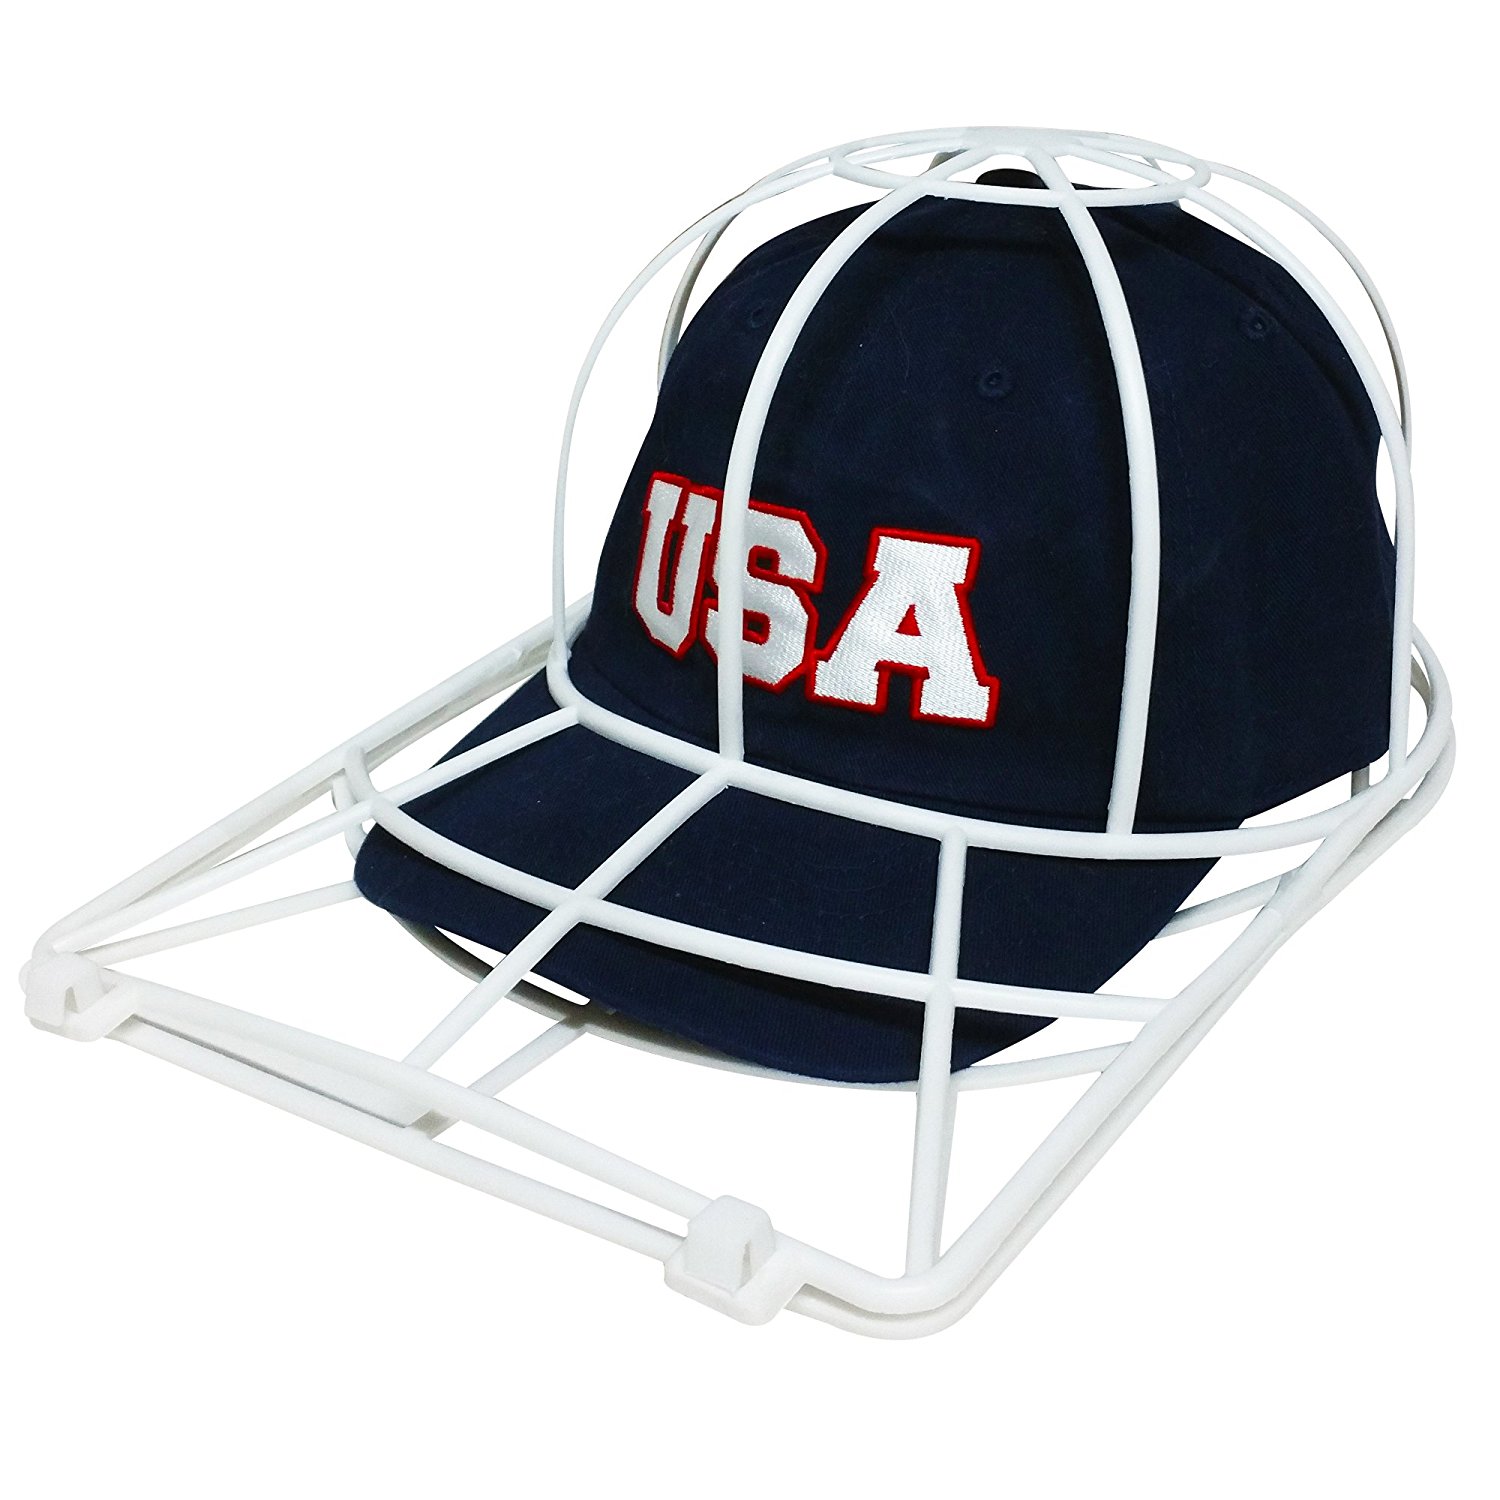 Cap Washer Baseball Cap Washer Great Hat Cleaner and Ball Cap Hat Washer. Clean Your Entire Collection From Your Cap Organizer, Hat Rack In Your Dishwasher Or Washing Machine - image 1 of 3